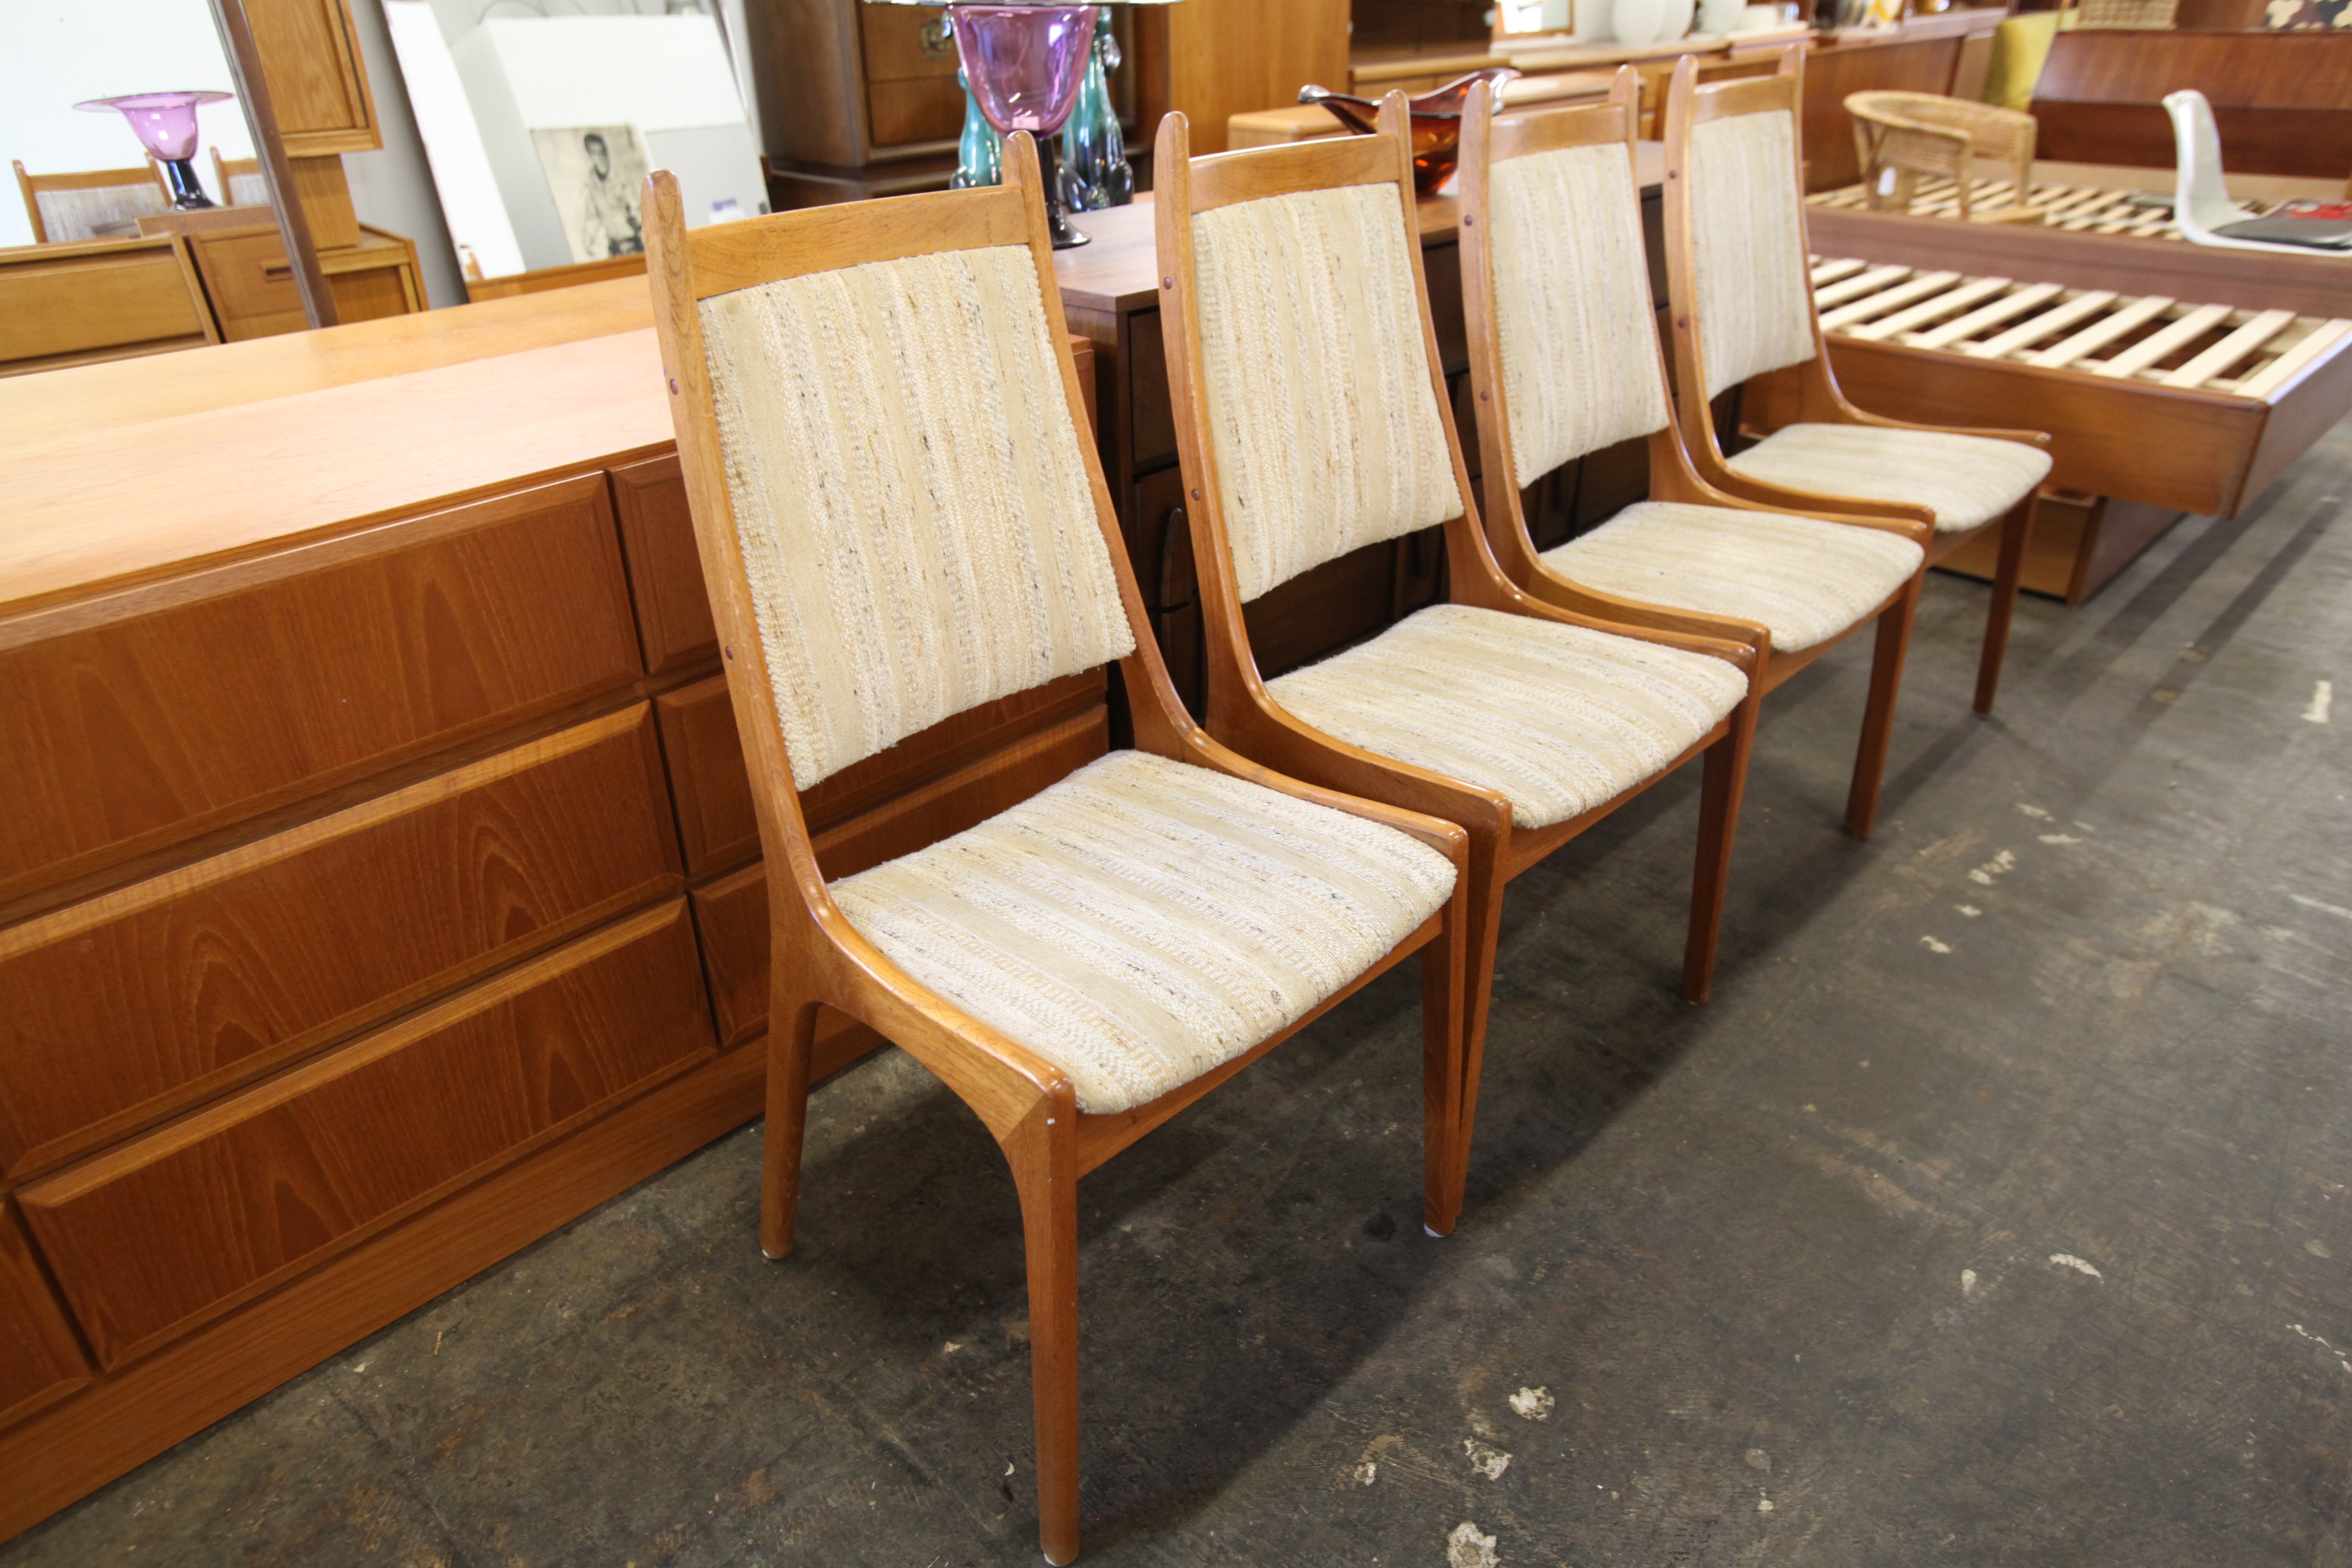 Set of 4 Vintage Teak High back Dining chairs (18.25"W x 39"H x 19"D)